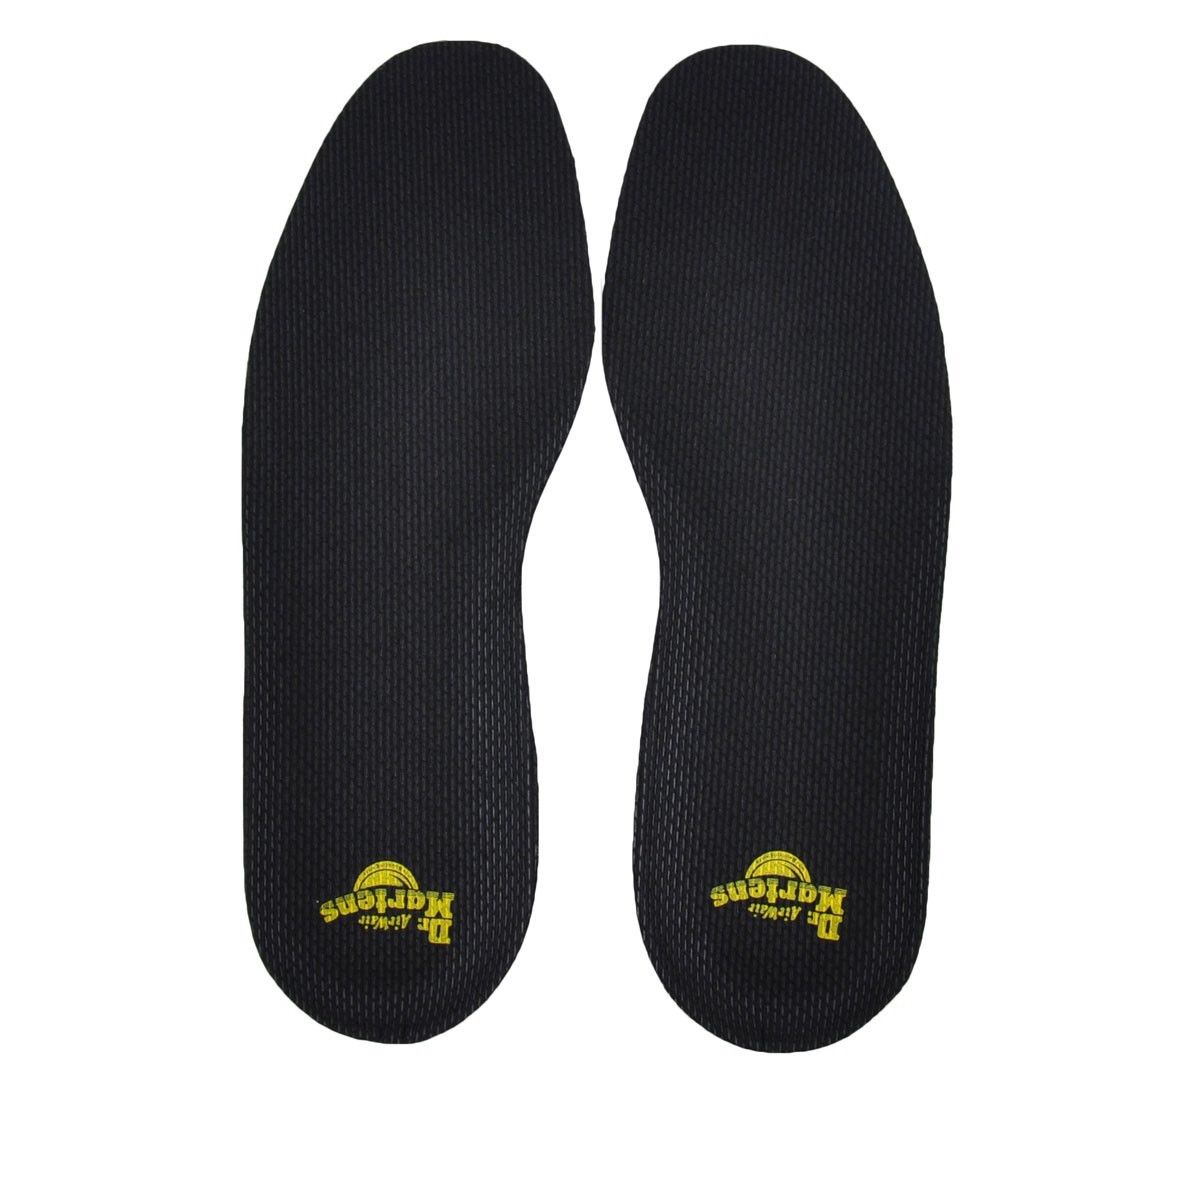 Comfort Insole - Accessories